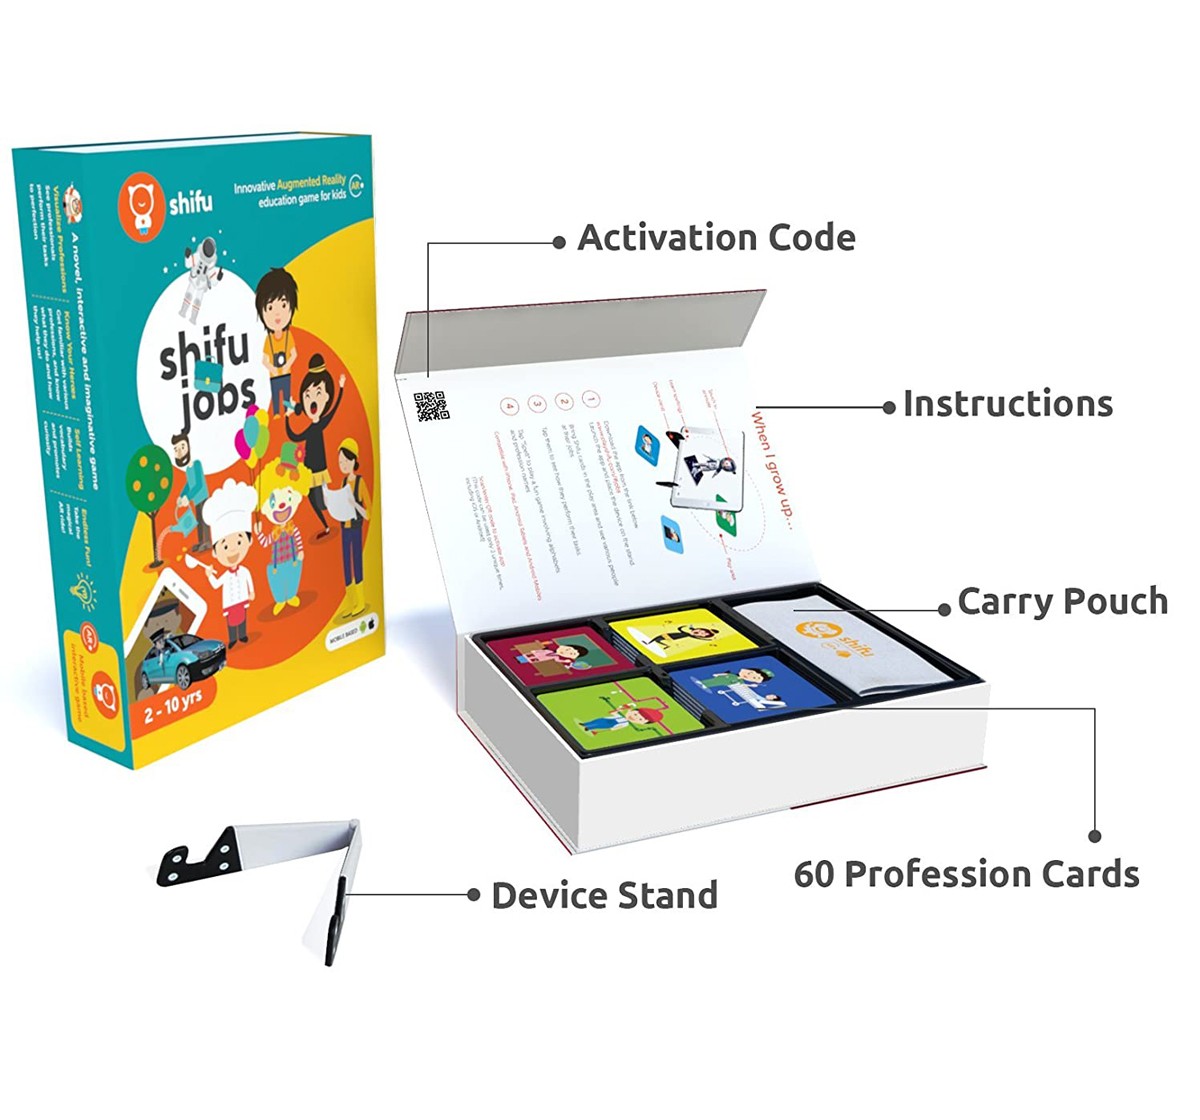 Playshifu Jobs Augmented Reality Learning Games - IOS & Android (60 Profession Cards) Science Kits for Kids age 24M+ 